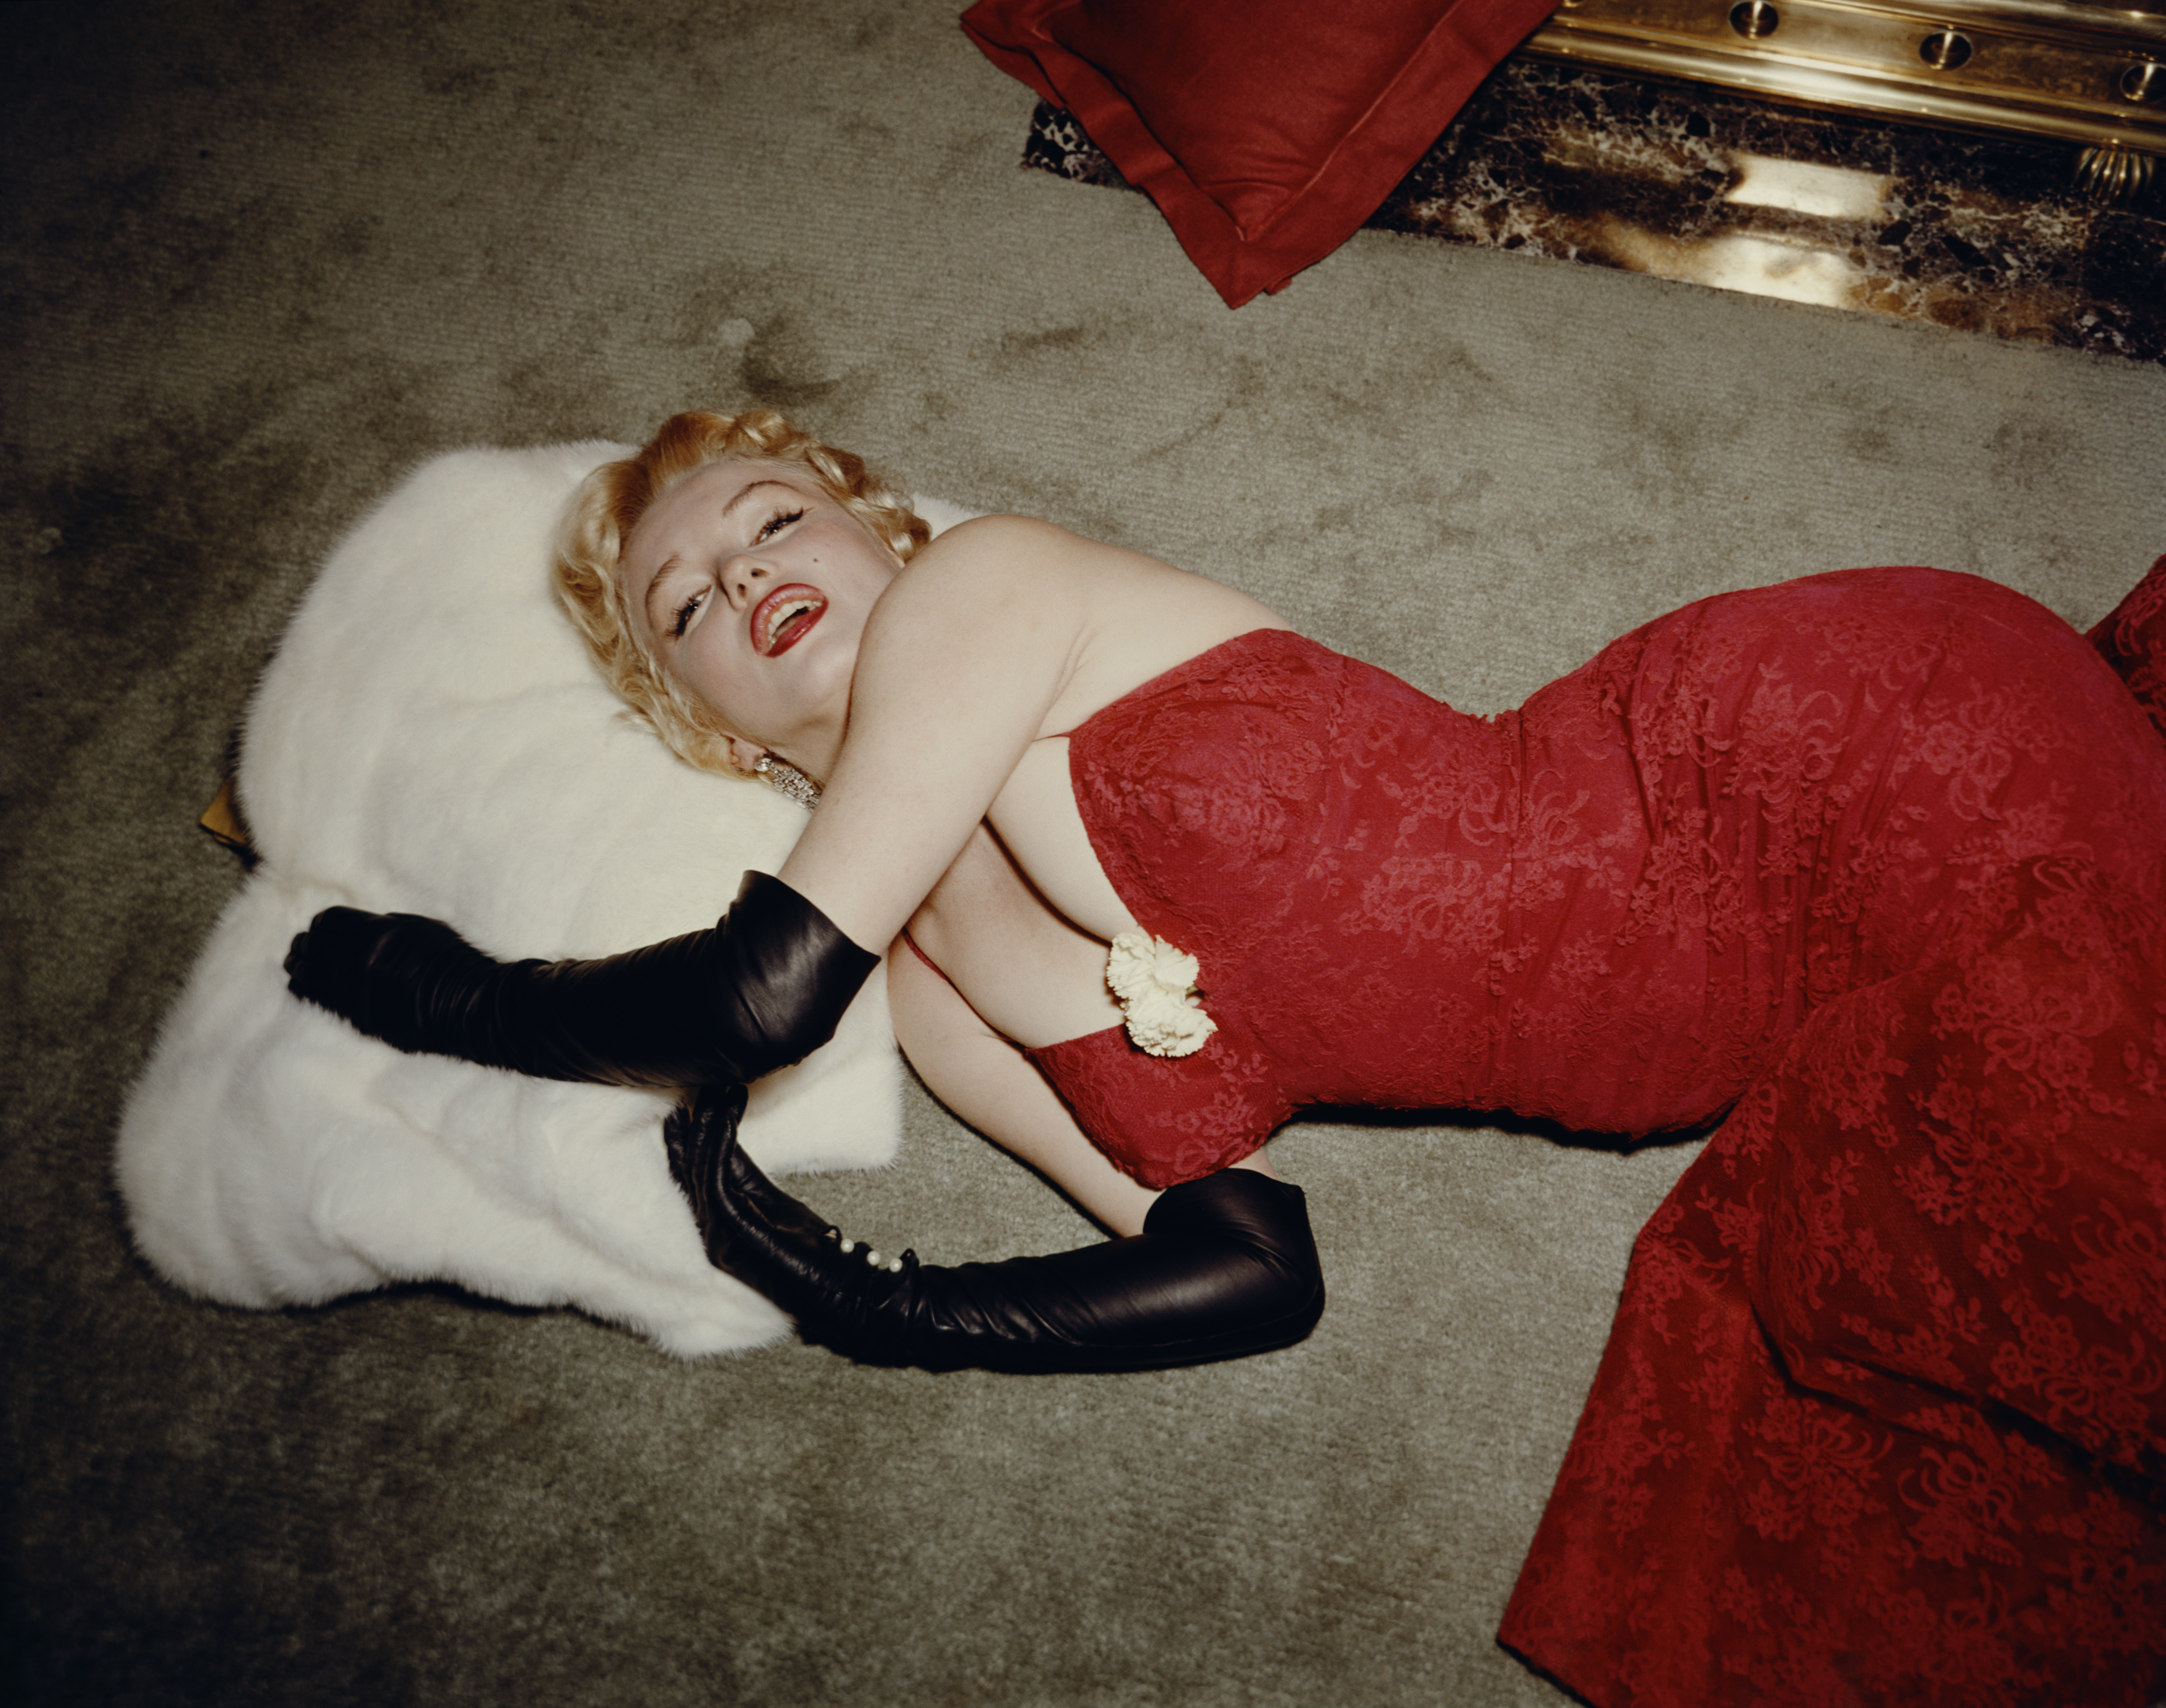 Marilyn Monroe photographed lying on the floor in 1955. | Source: Getty Images